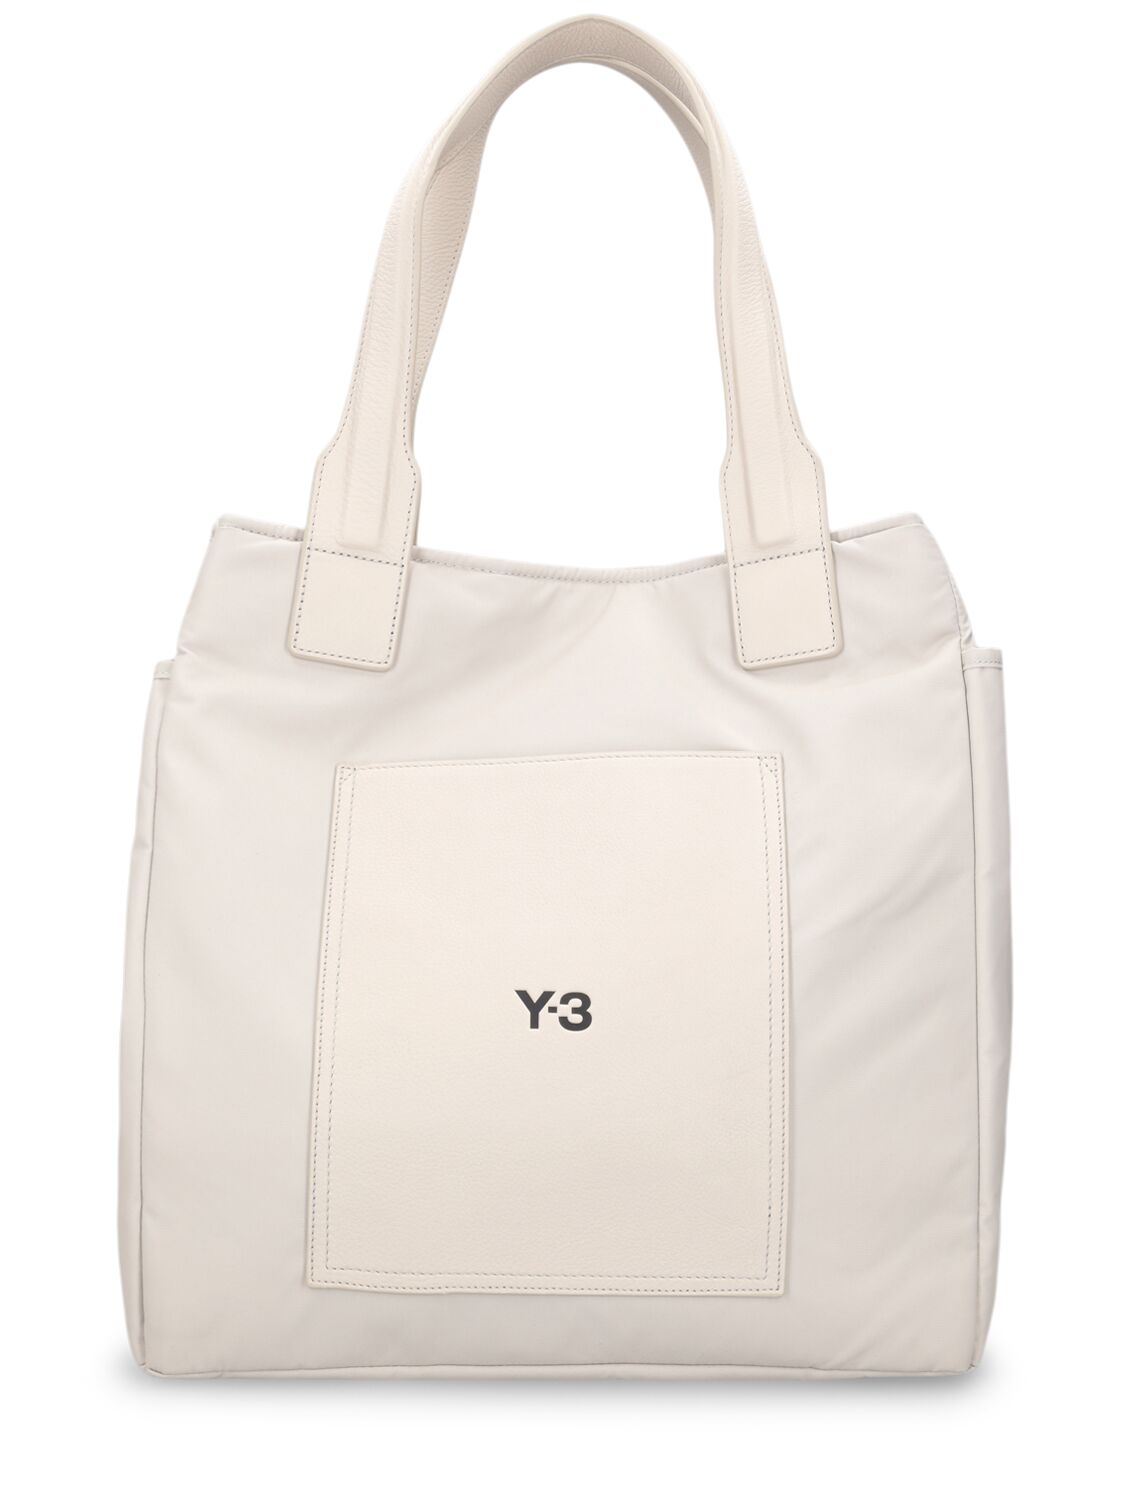 Y-3 Lux Tote Bag In White